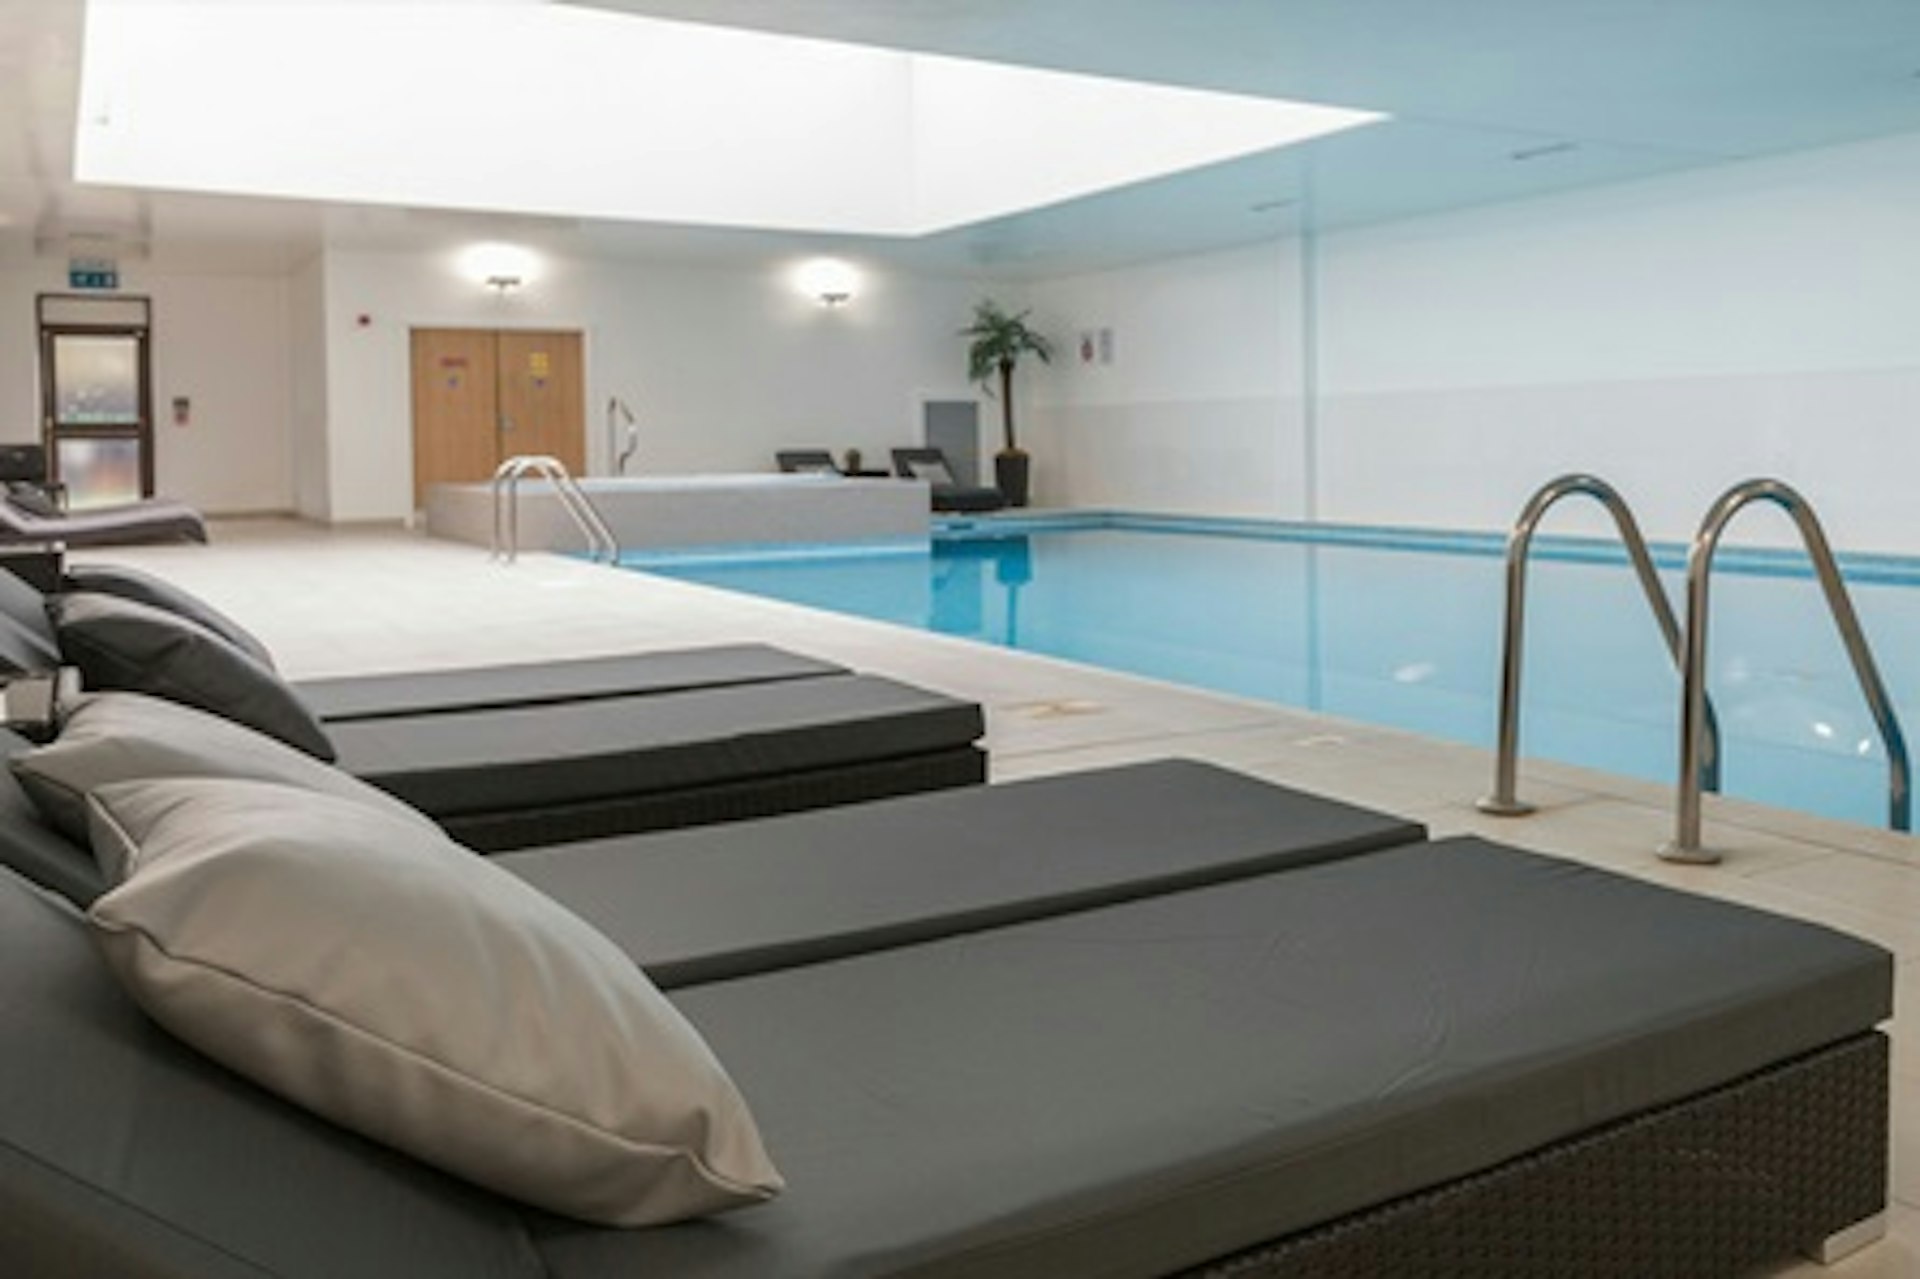 Sunday Night Spa Break with Dinner for Two at The Oxfordshire Hotel & Spa 2